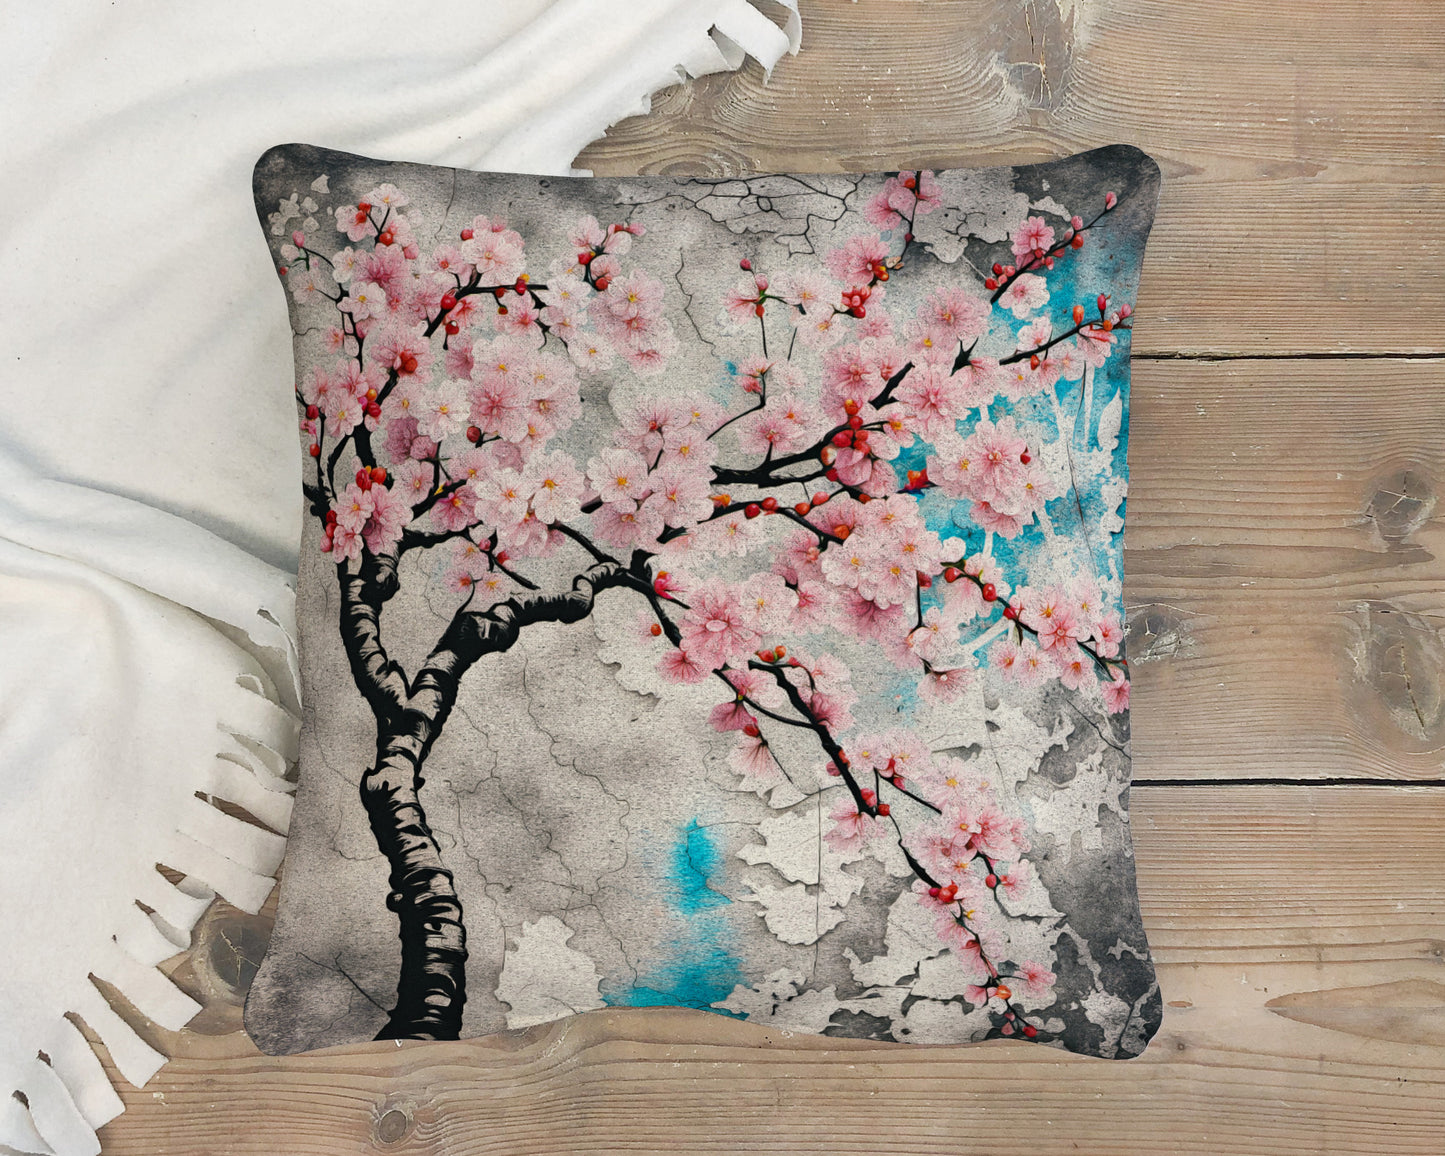 Japanese Themed Outdoor Pillows and Patio Decor Pink Cherry Blossoms Print on deck